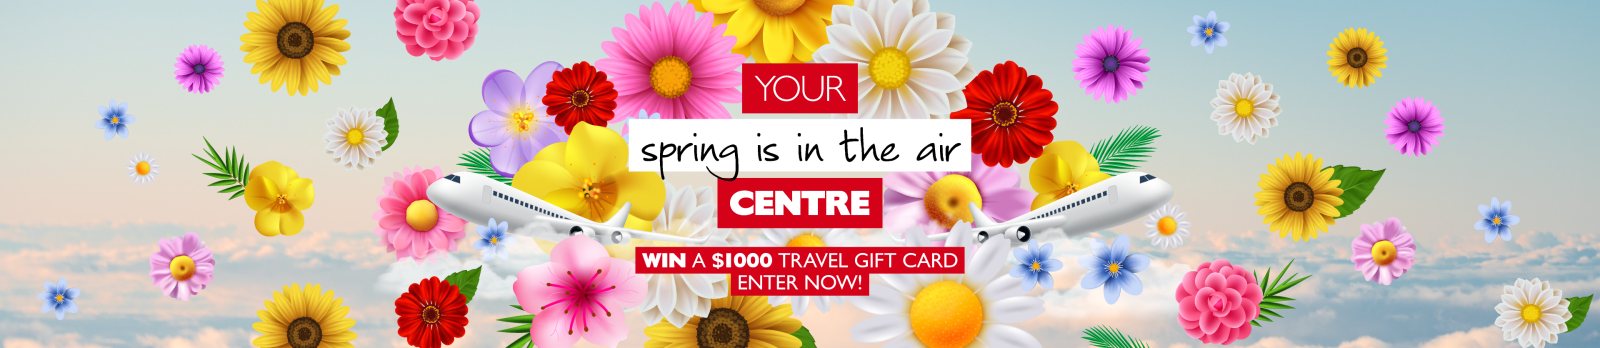 Your Spring is in the air centre | Win a $1,000* travel gift card. Enter Now! A cartoon image of planes and colourful flowers